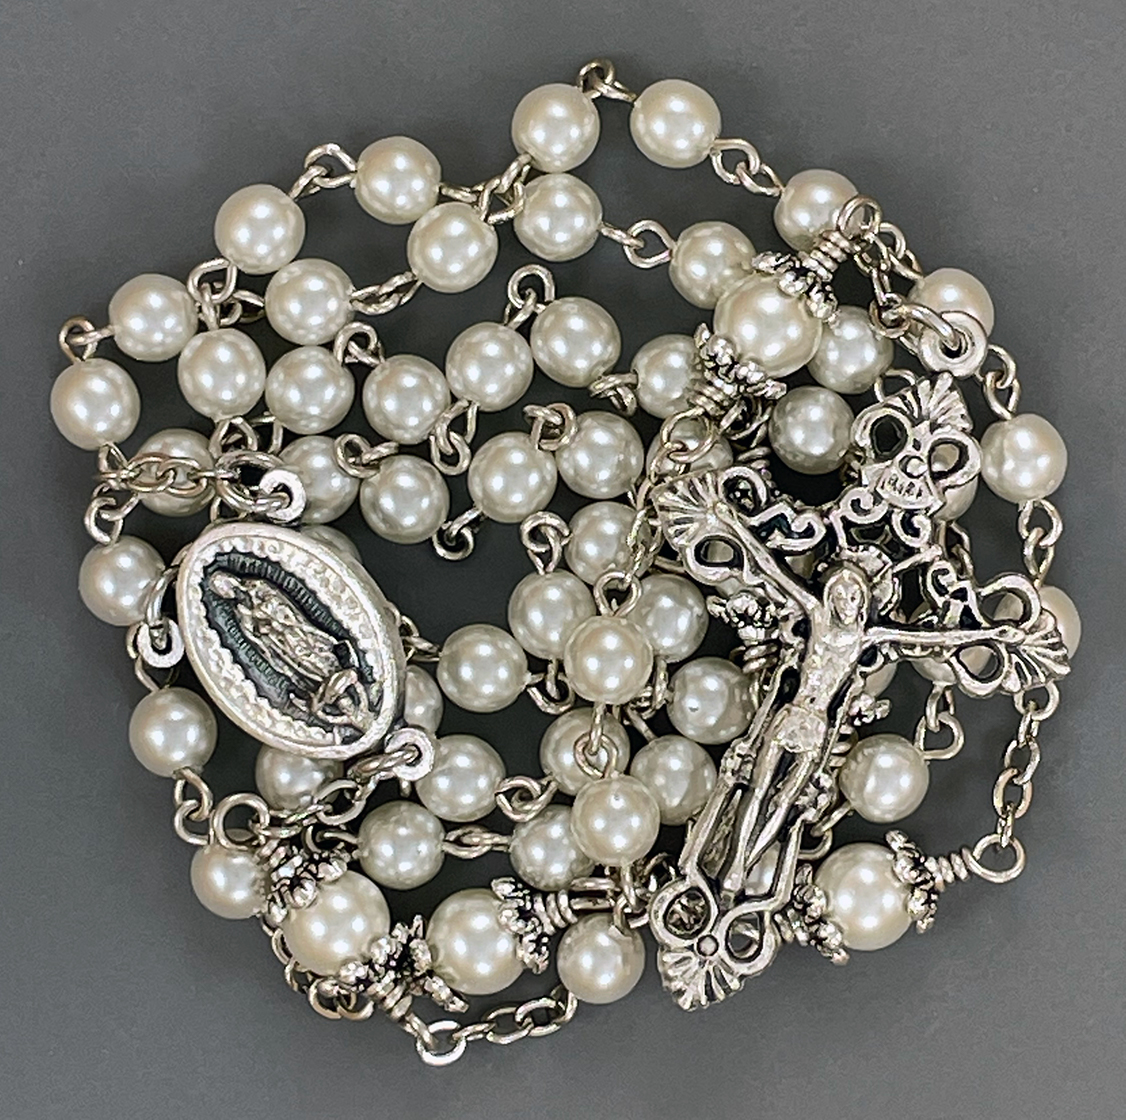 Our Lady of Guadalupe Glass Pearl Rosary ($32.99)